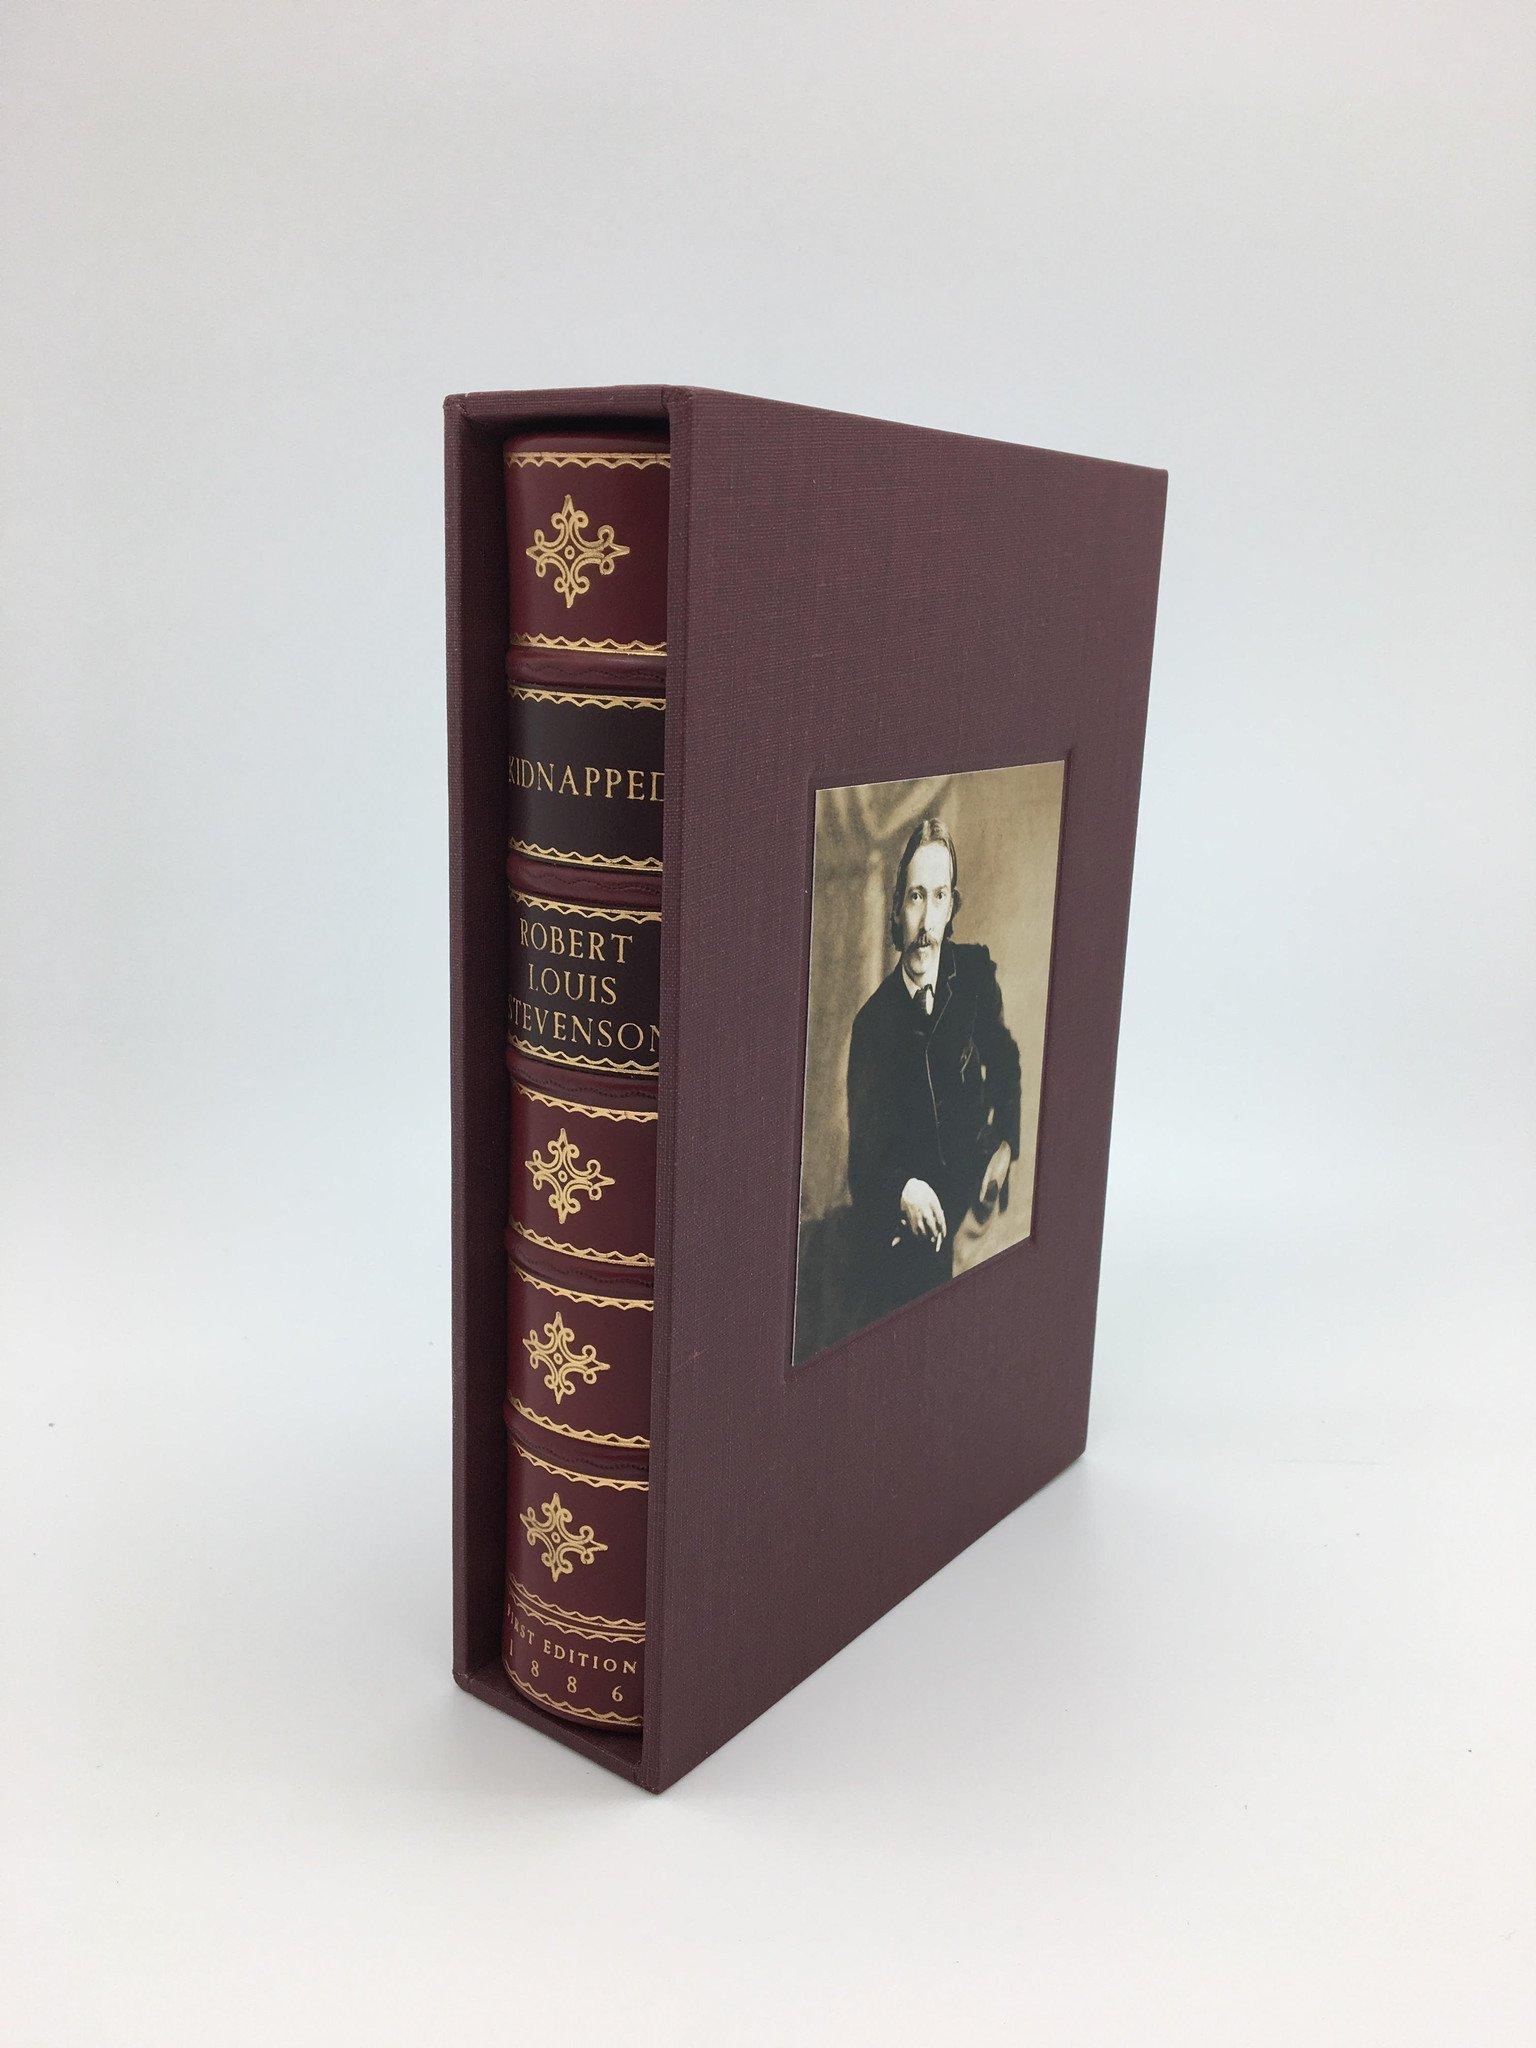 Stevenson, Robert Louis. Kidnapped. London: Cassell & Company Ltd., 1886. First edition, first state. The book is presented with a custom archival slipcase.

Offered is a first edition, first state of Robert Louis Stevenson's Kidnapped, circa 1886.